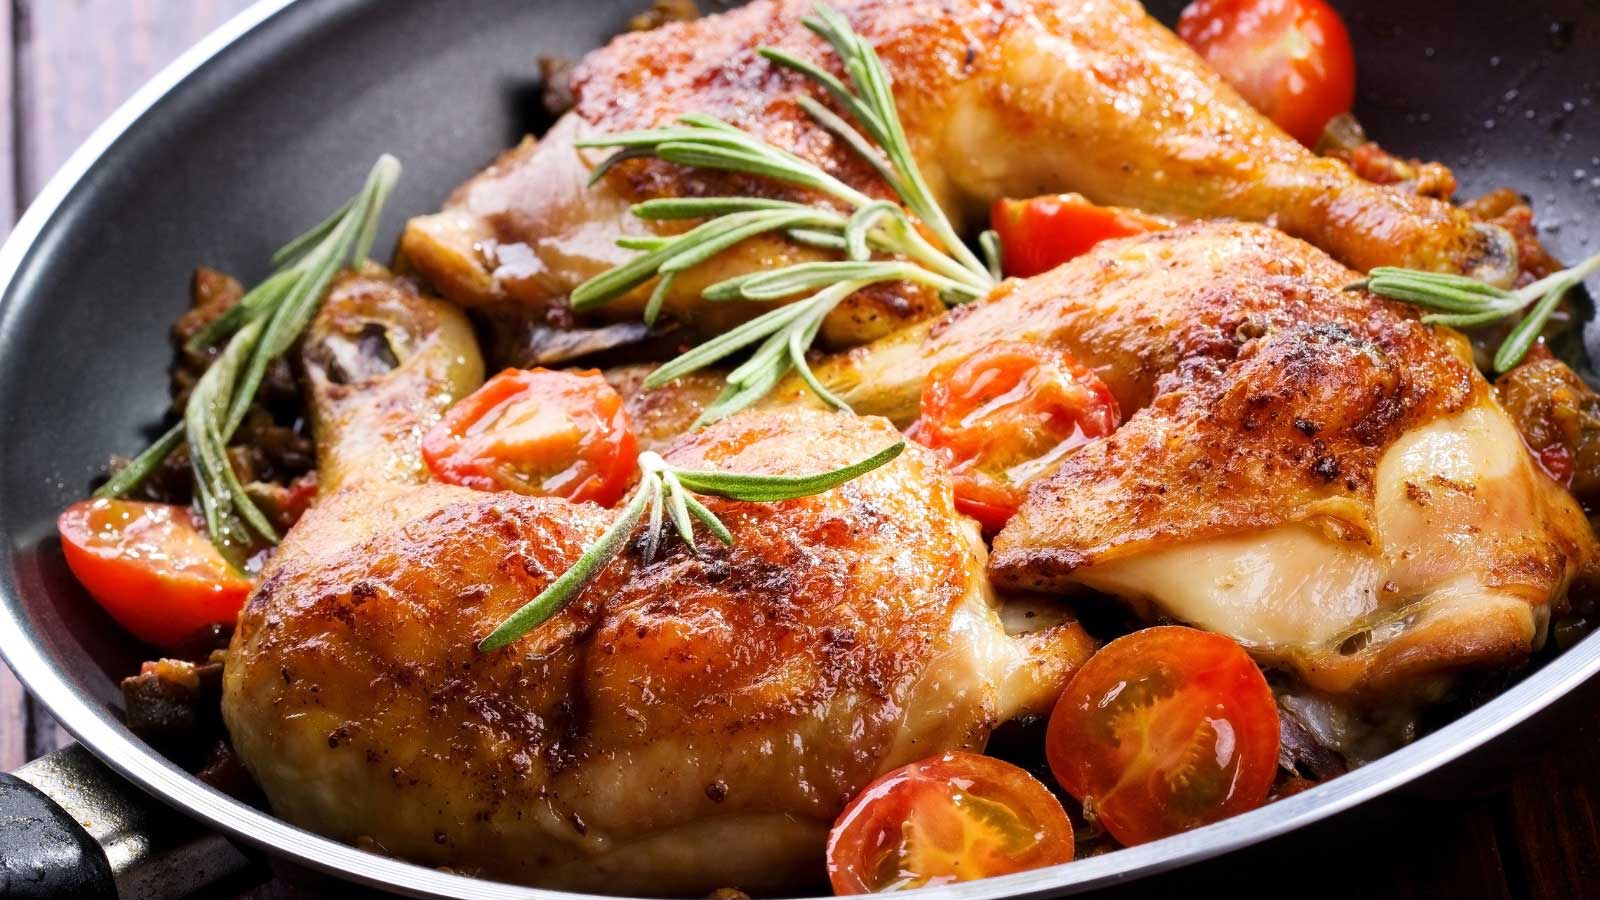 Roasted chicken legs with vegetables and herbs.